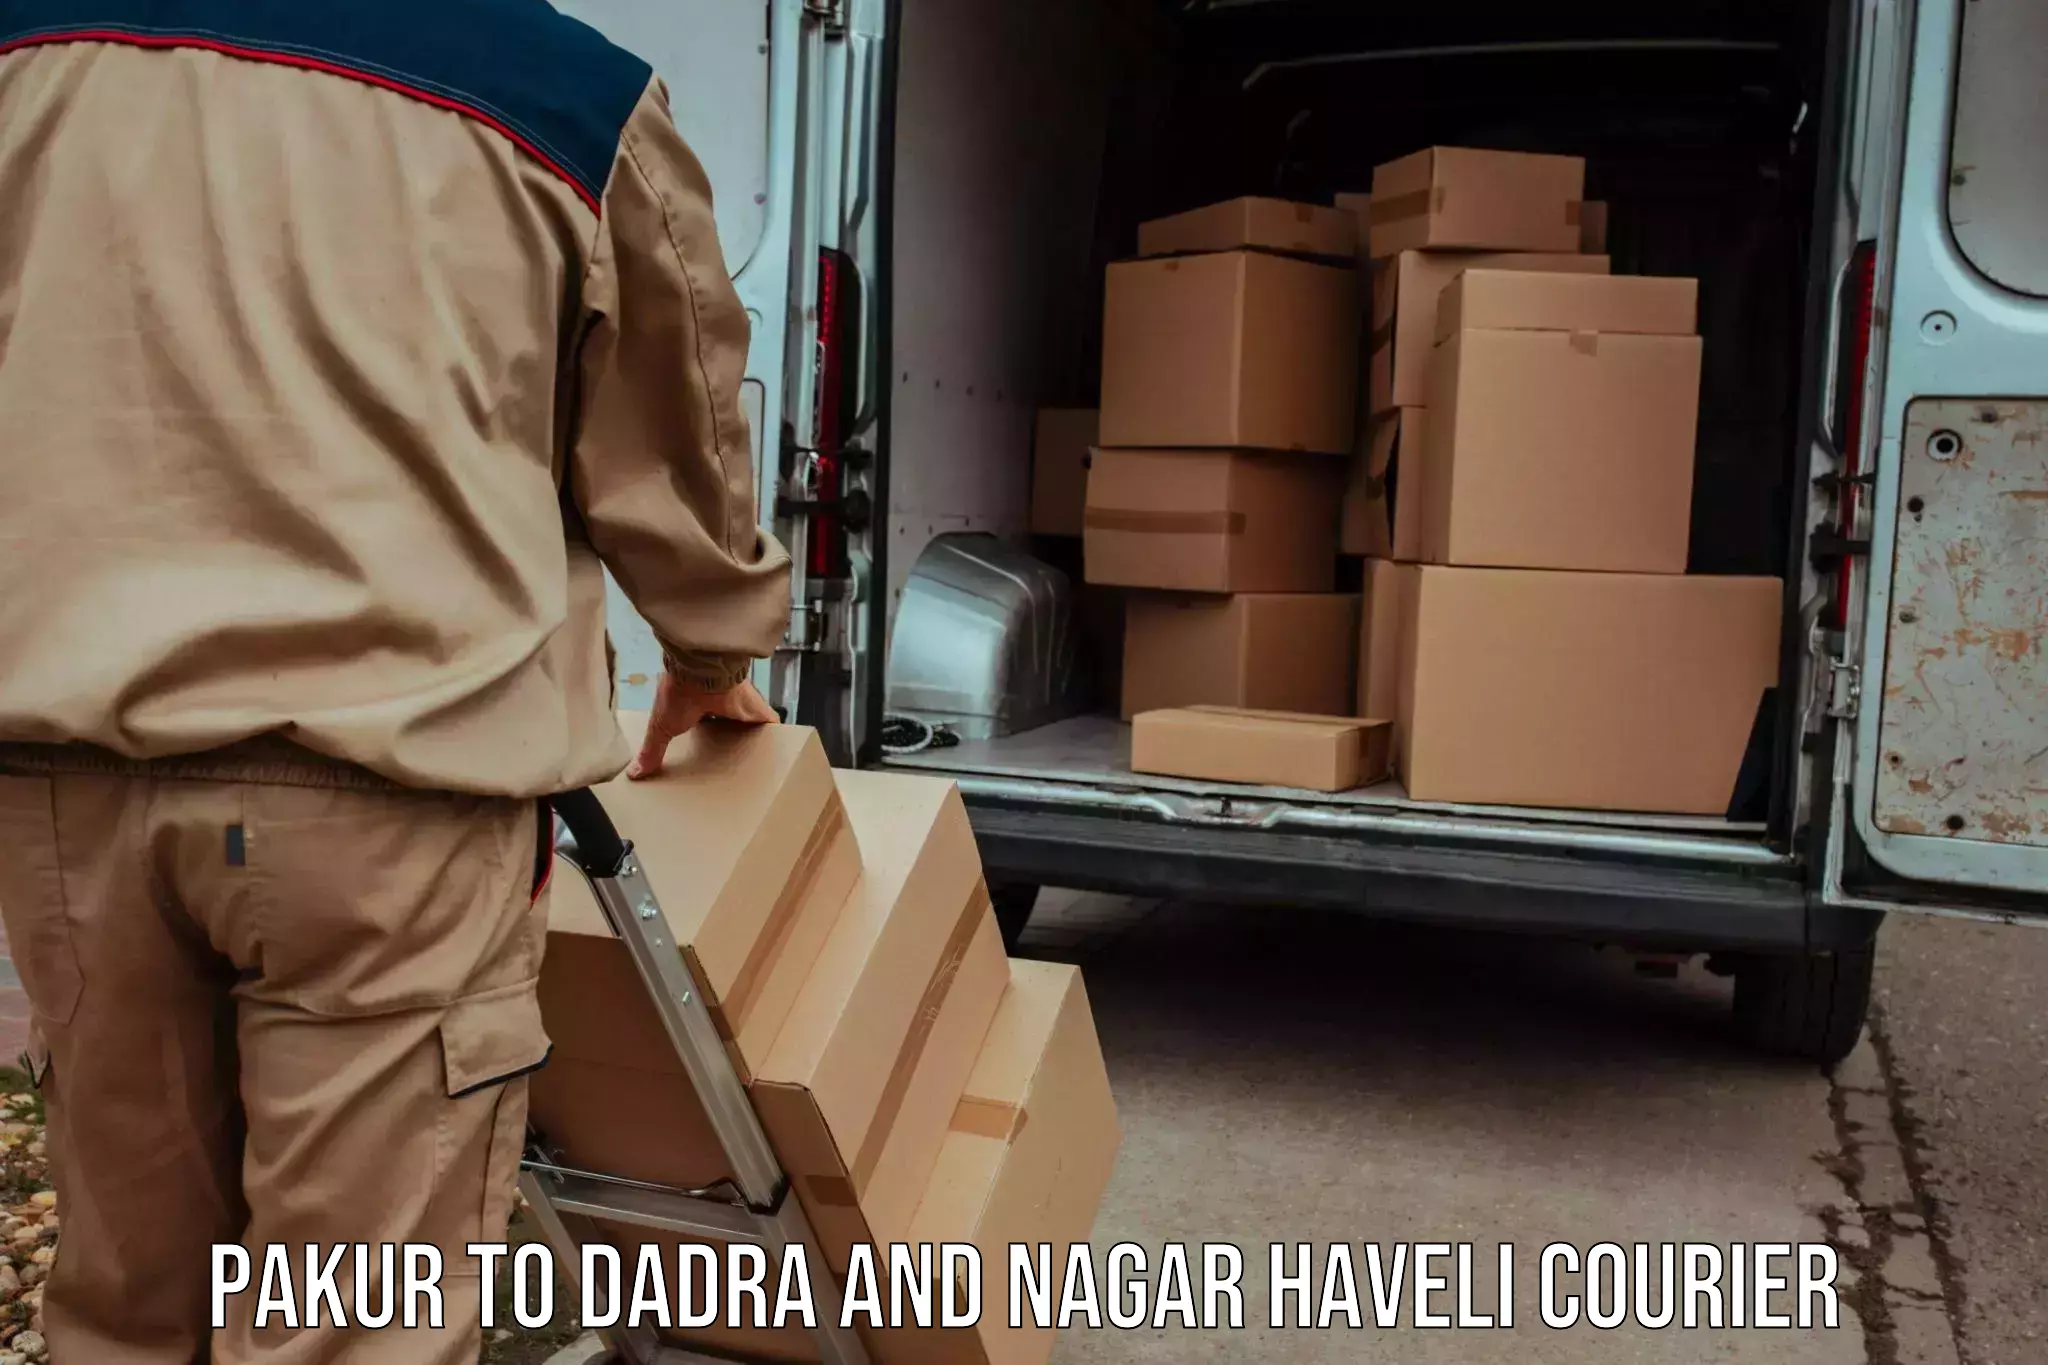 Cash on delivery service Pakur to Dadra and Nagar Haveli